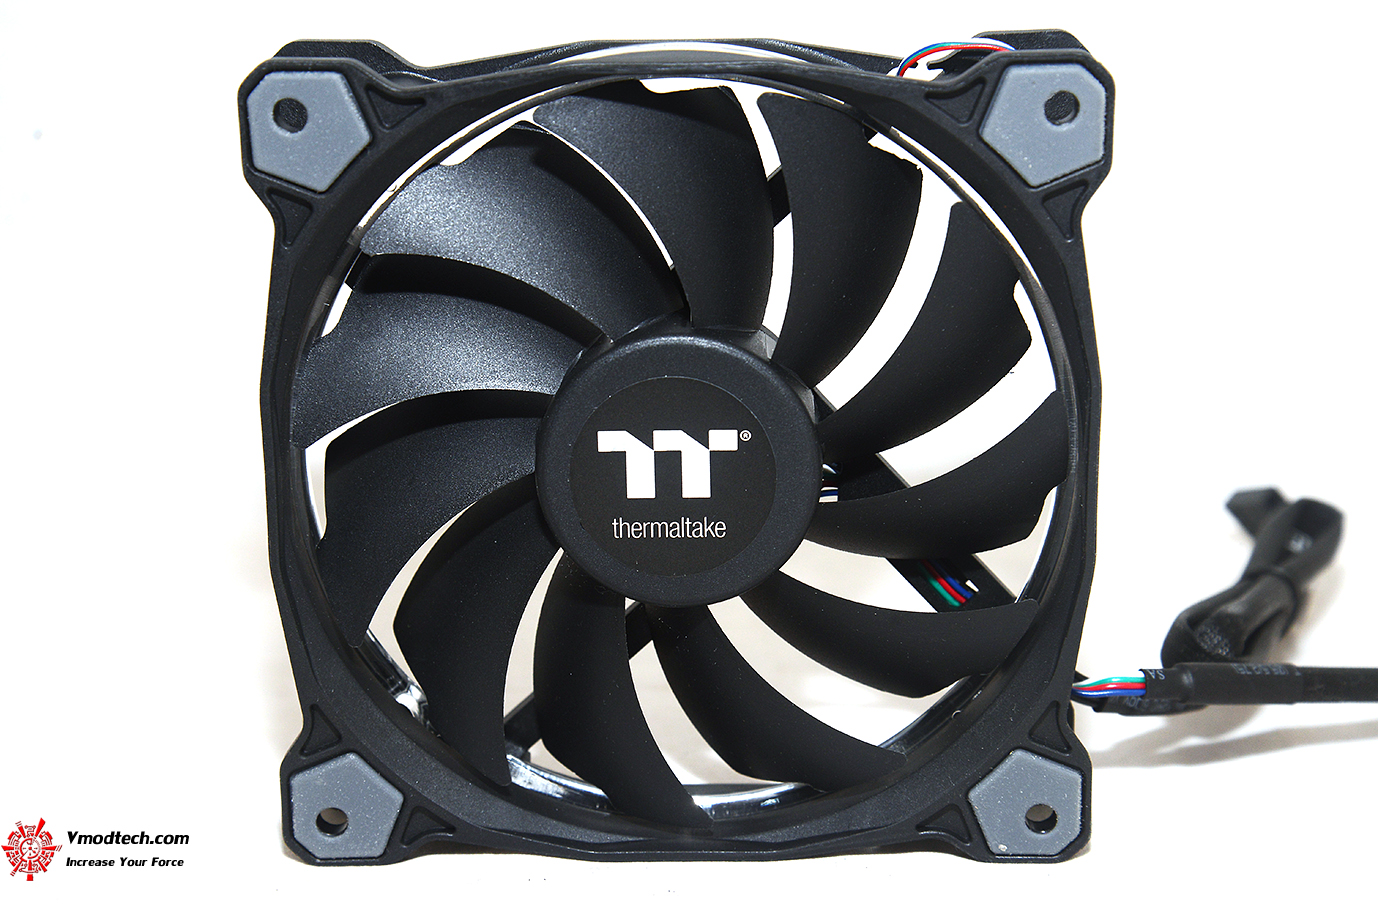 dsc 5252 Thermaltake Riing Silent 12 RGB Sync Edition CPU Cooler Review